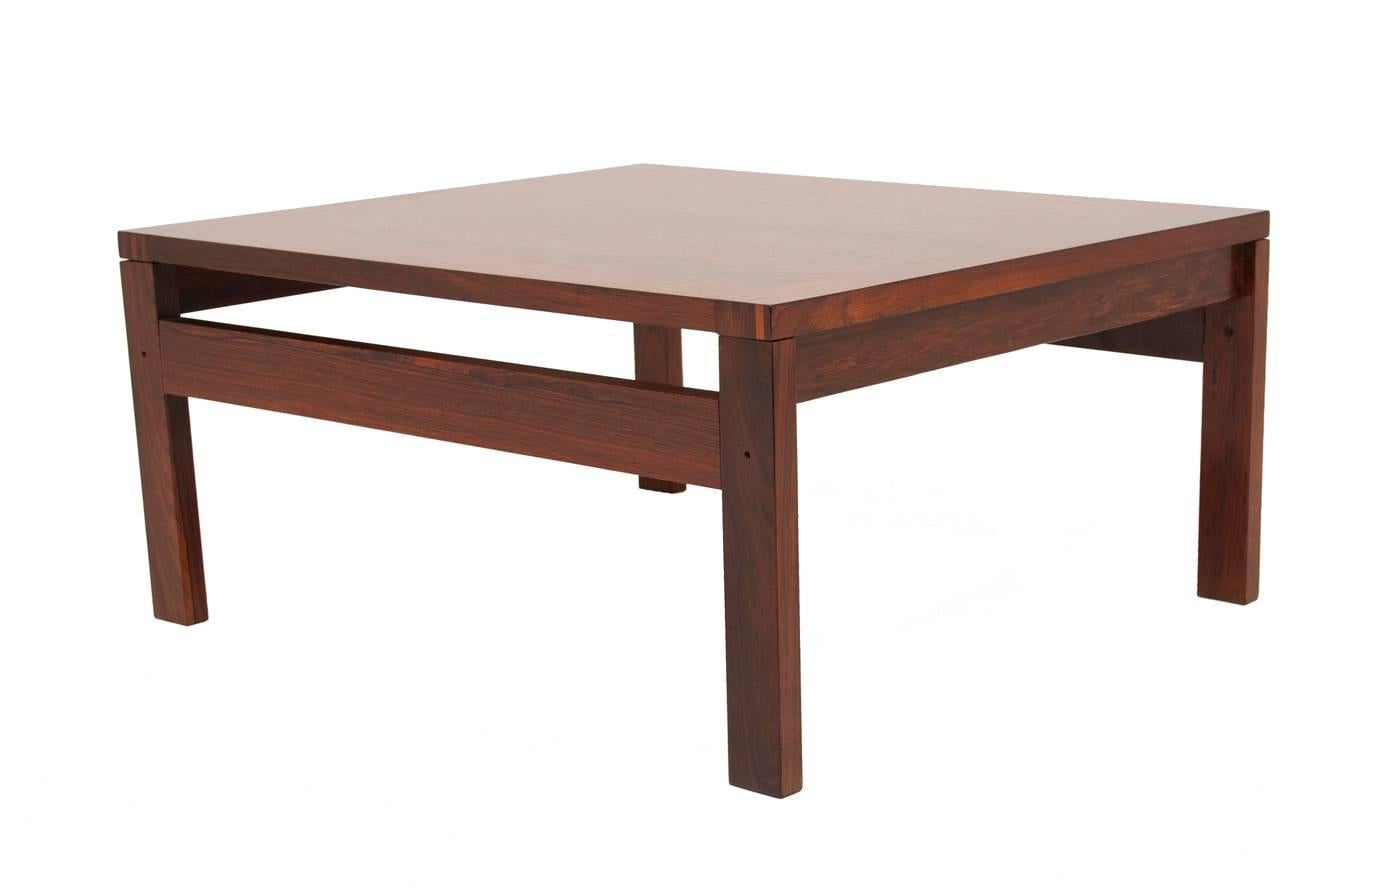 Rosewood coffee table from the moduline range by France and sons designed by Ole Gjerlov-Knudsen and Torben Lind.
Lovely clean lines with exposed joints. Makers badge.
Professionally restored.